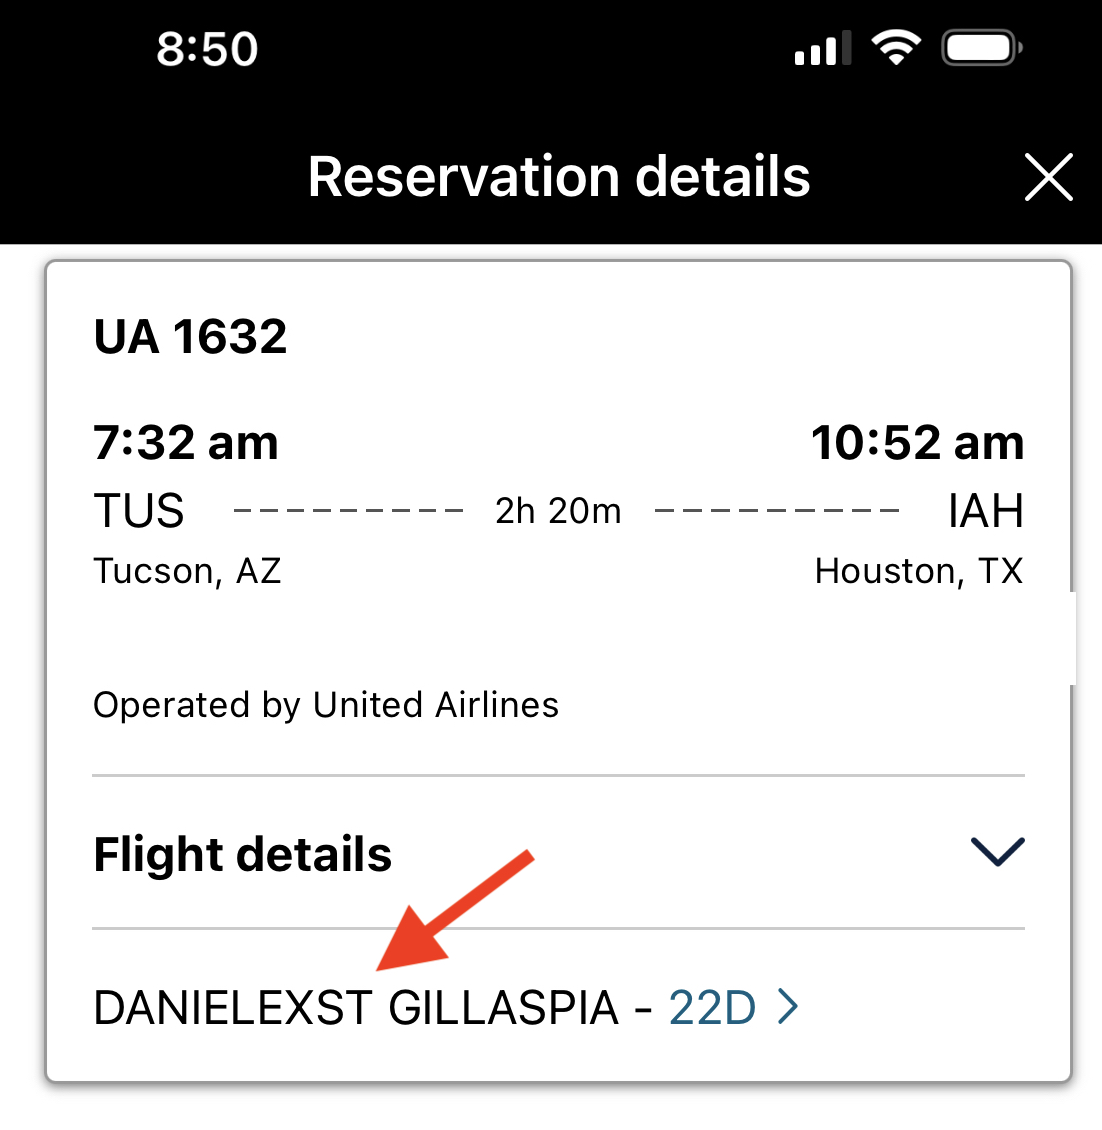 United extra seat reservation details